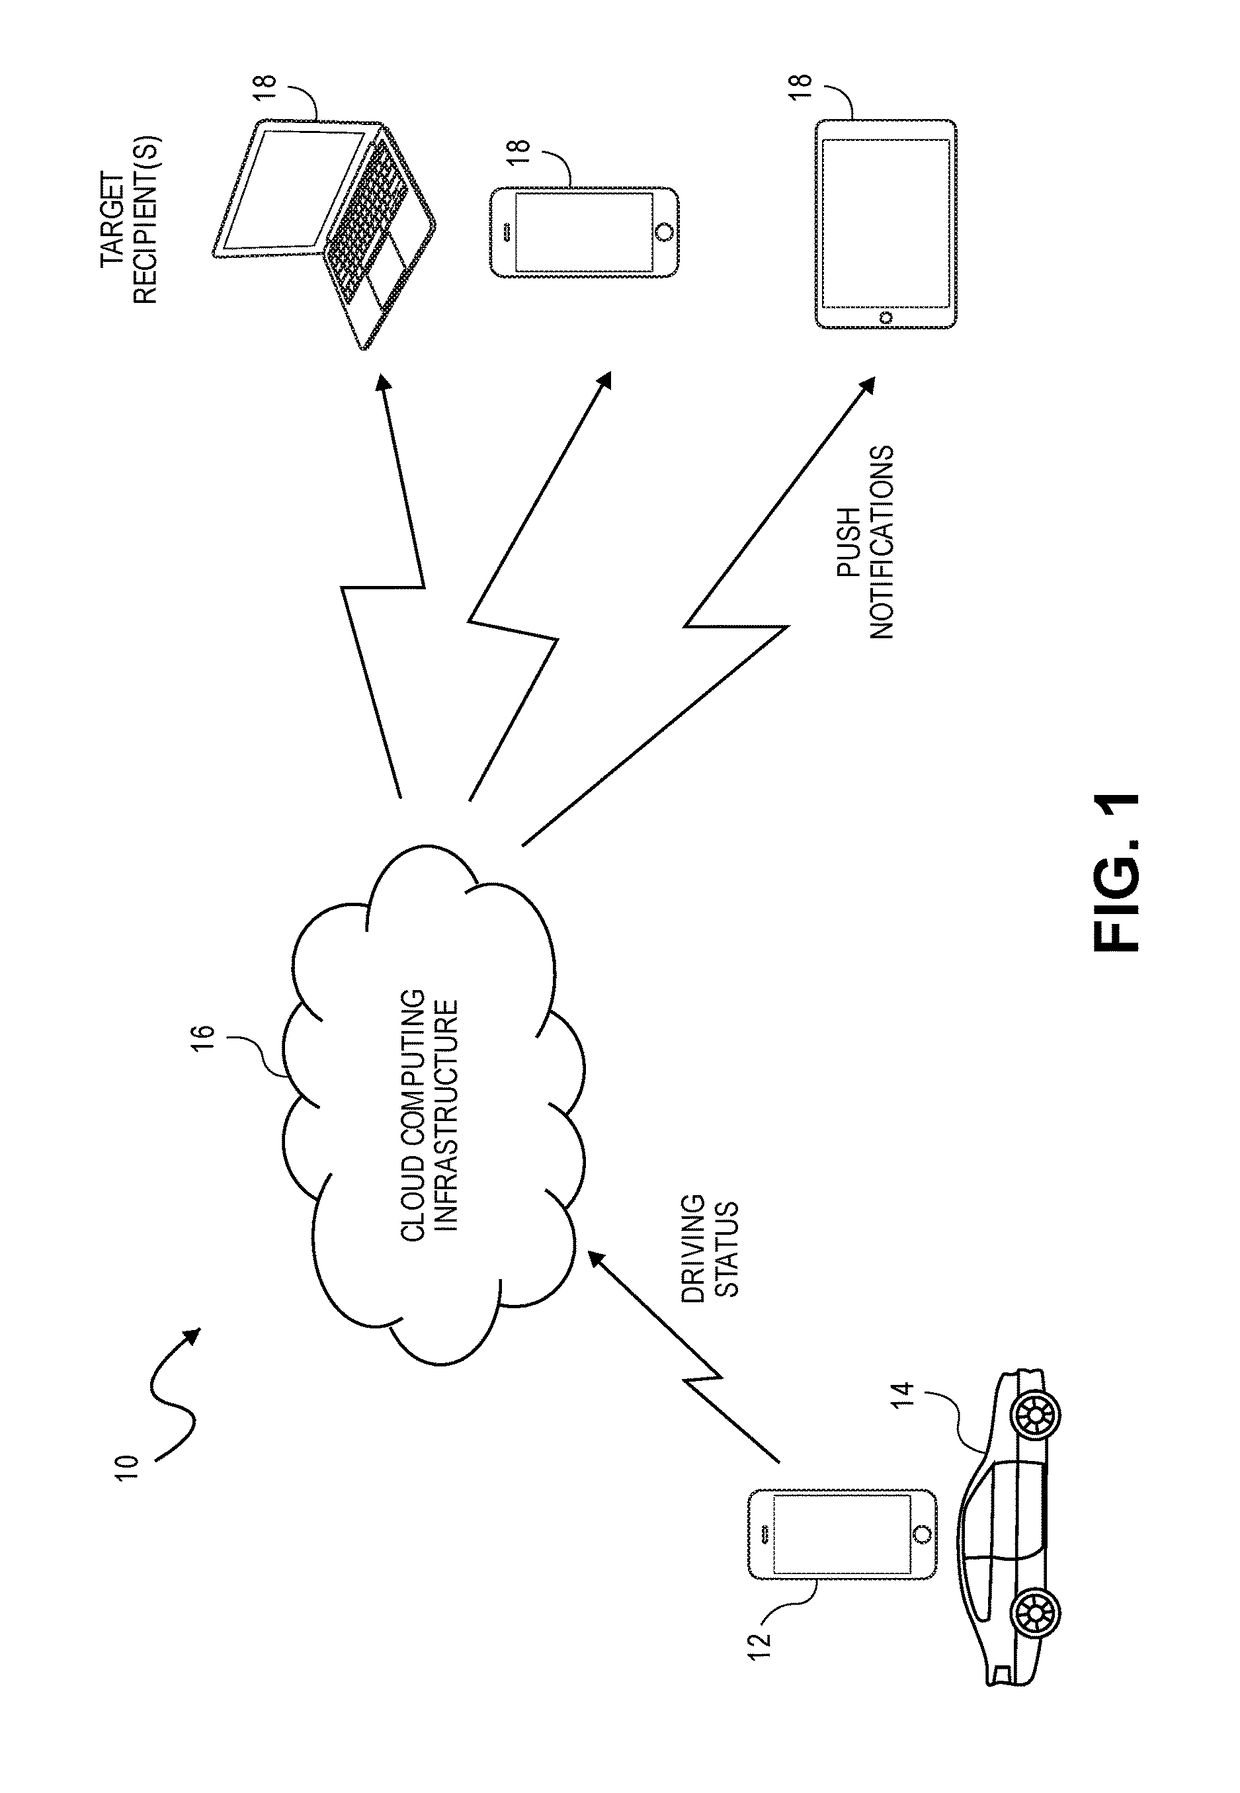 System and method for generating driver status and destination arrival push notifications for reducing distracted driving and increasing driver safety